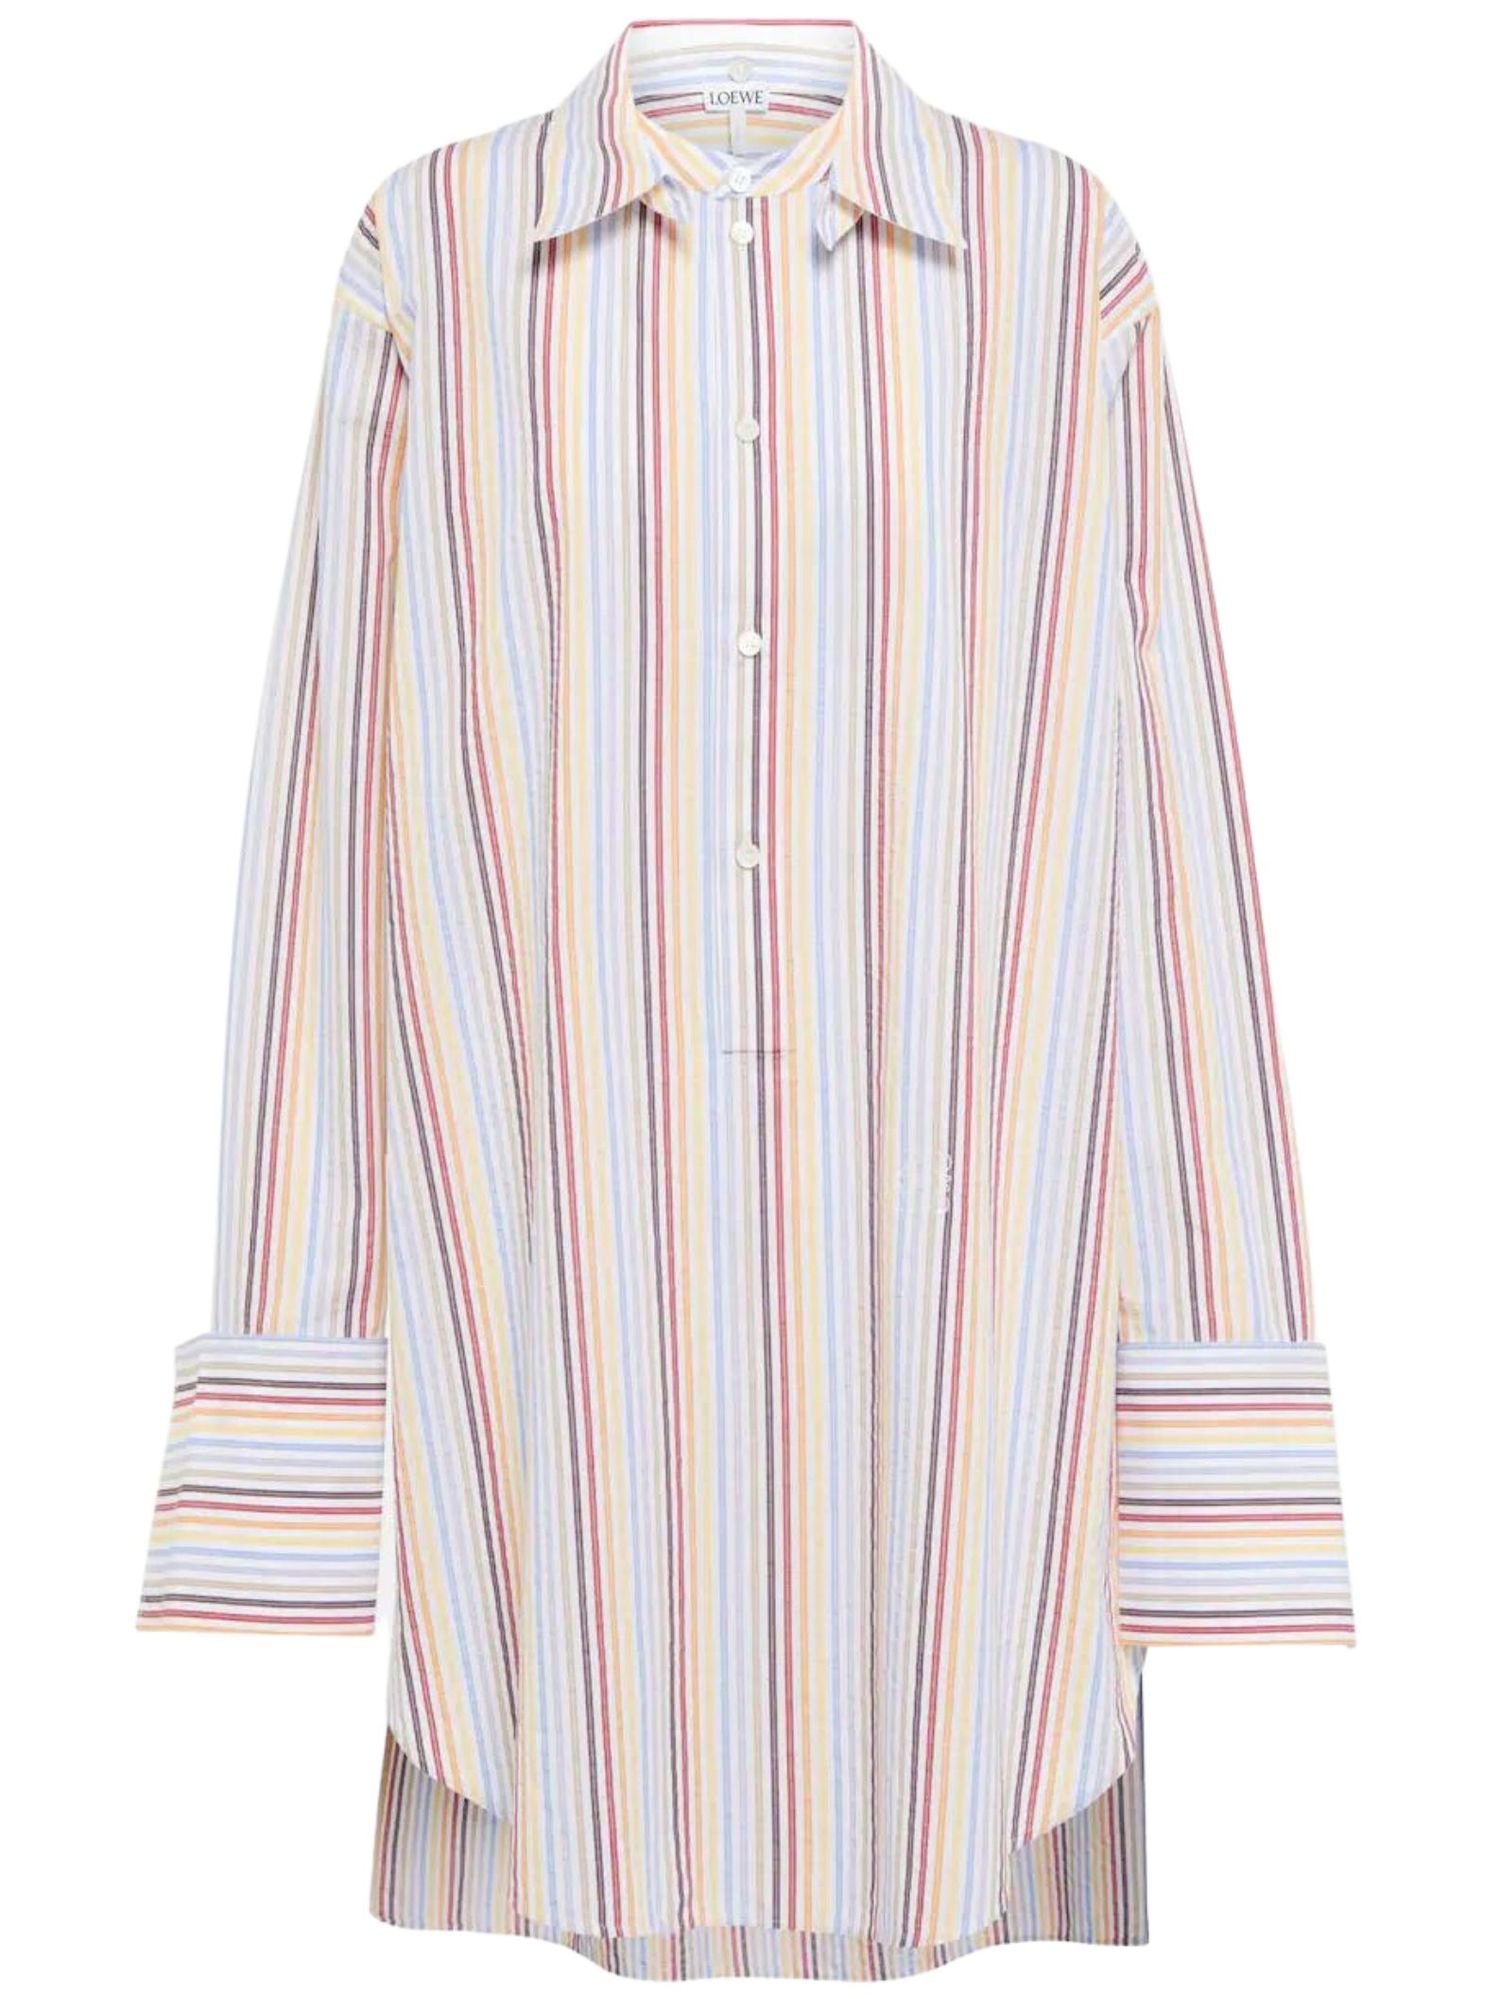 Button up in the 18 best shirt dresses to buy now - Vogue Scandinavia